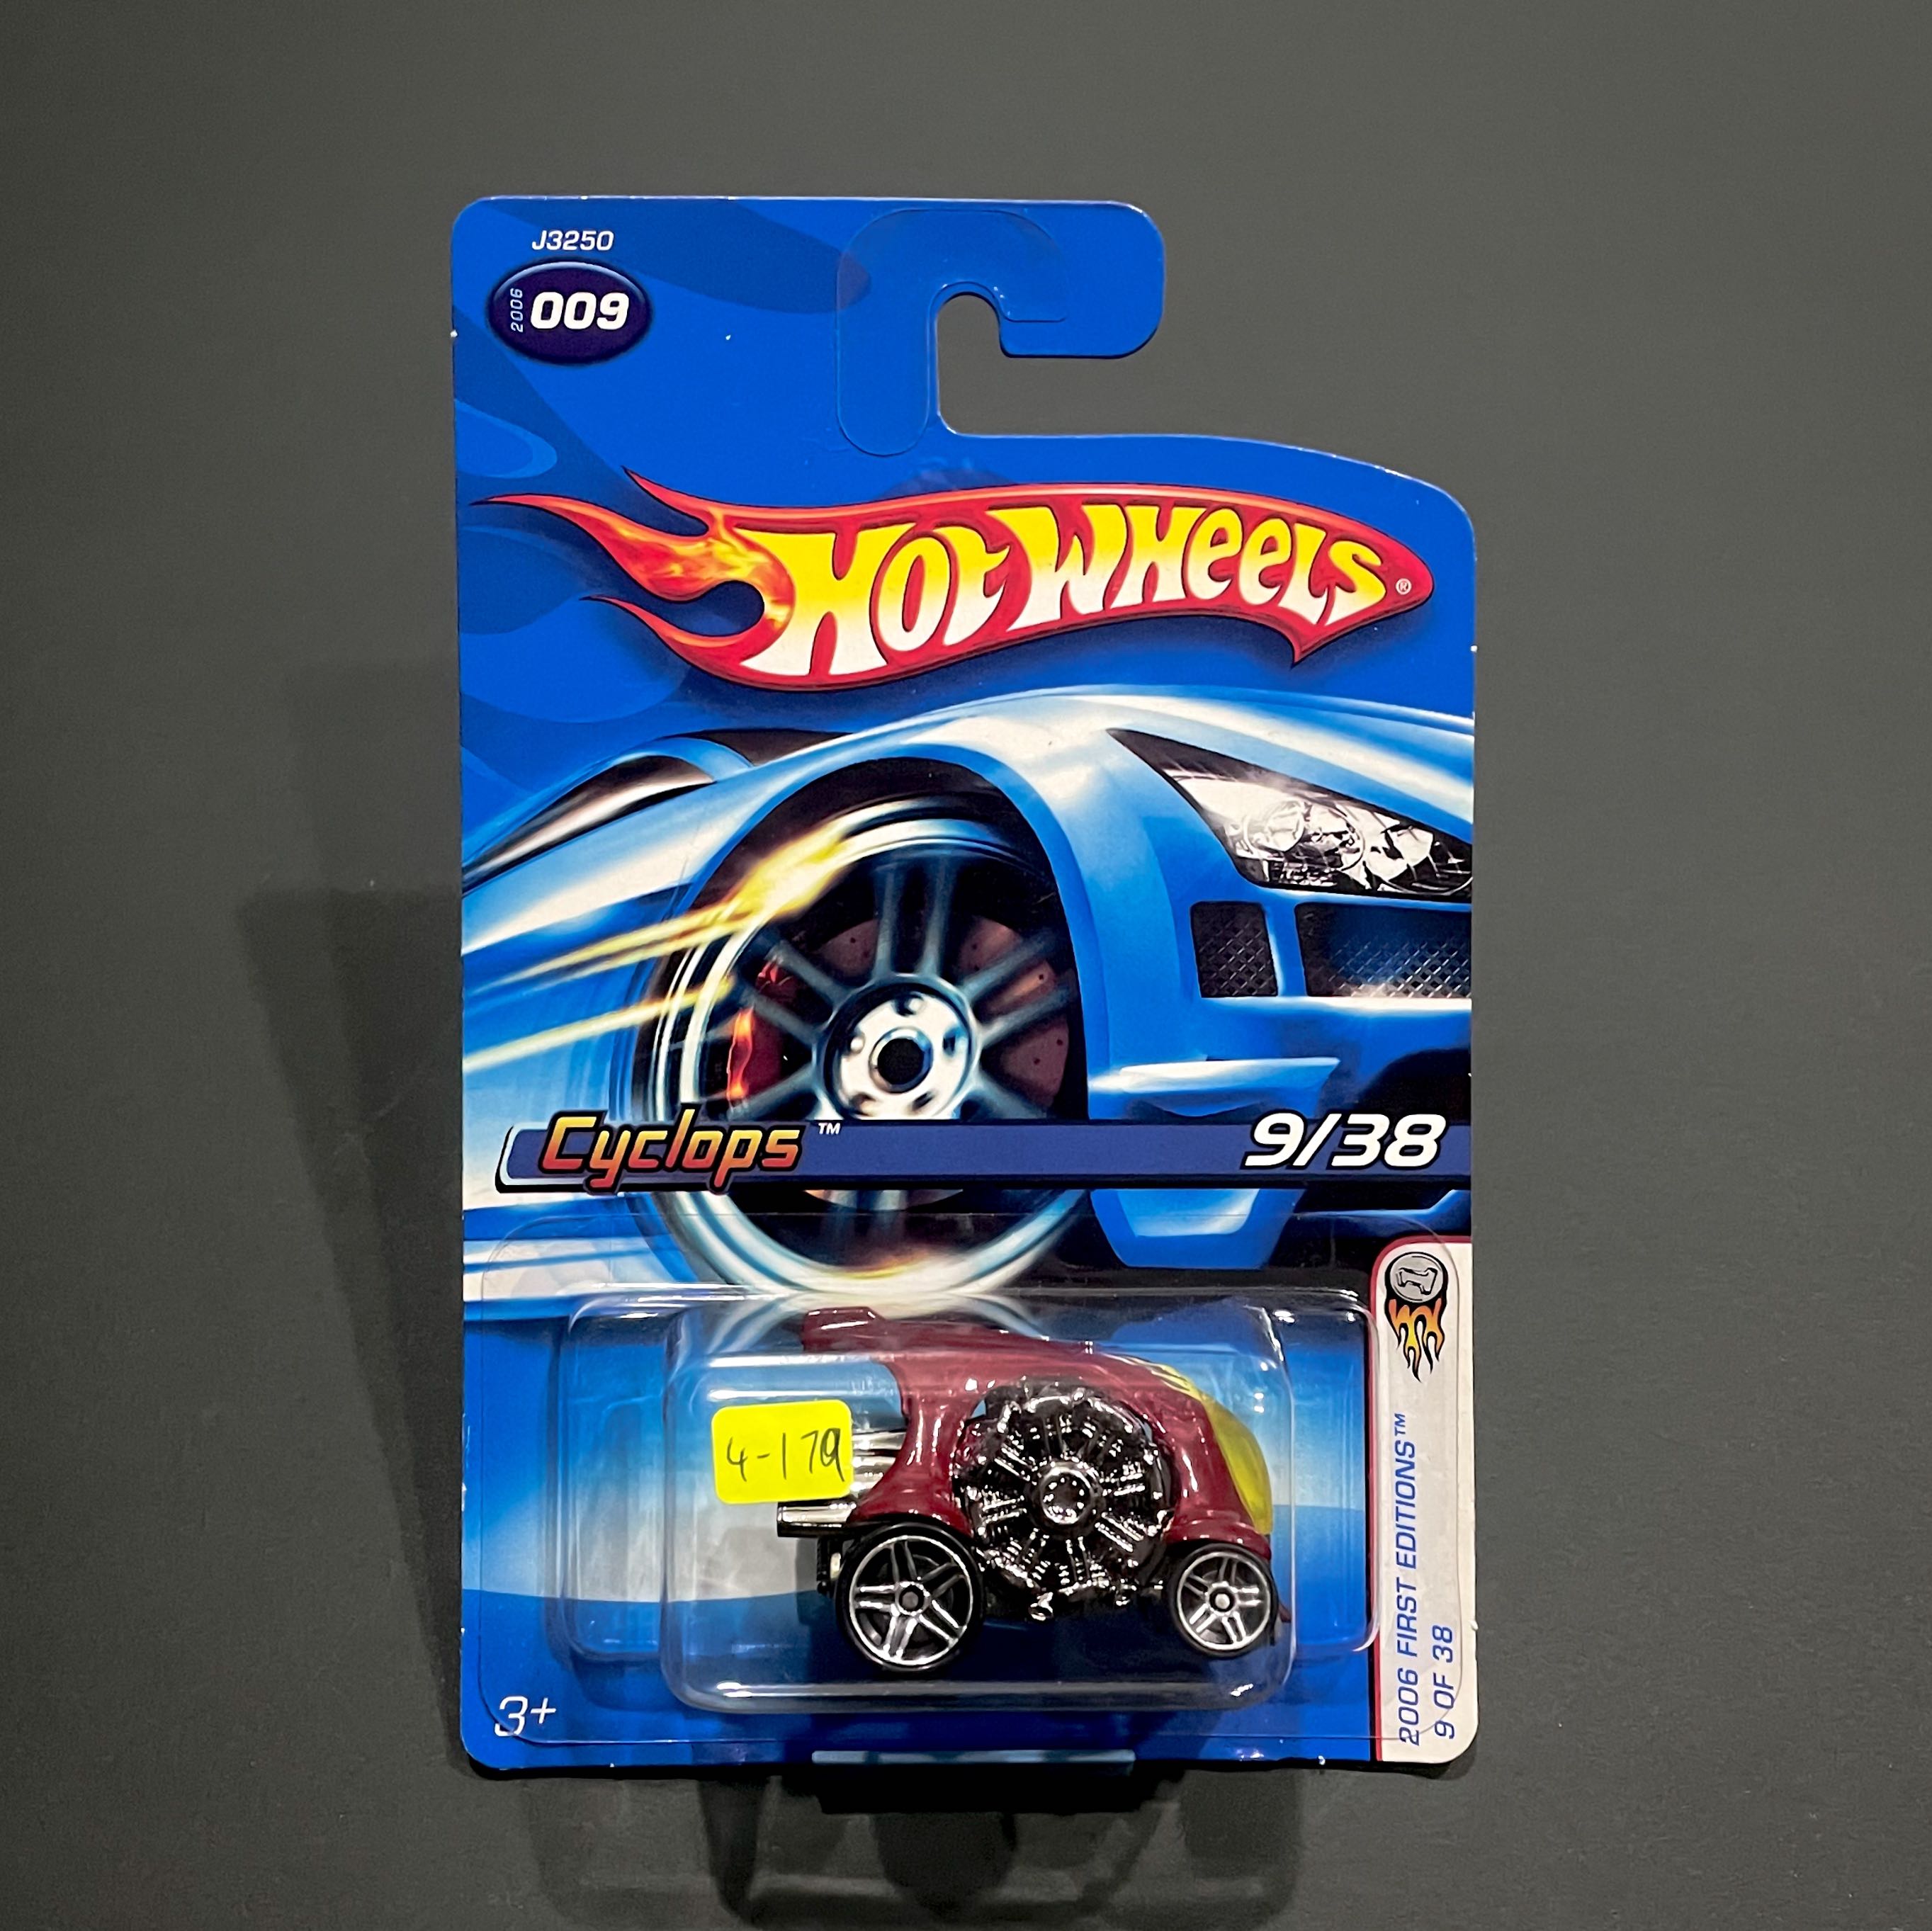 2006 Hot Wheels First Editions Cyclops 9 